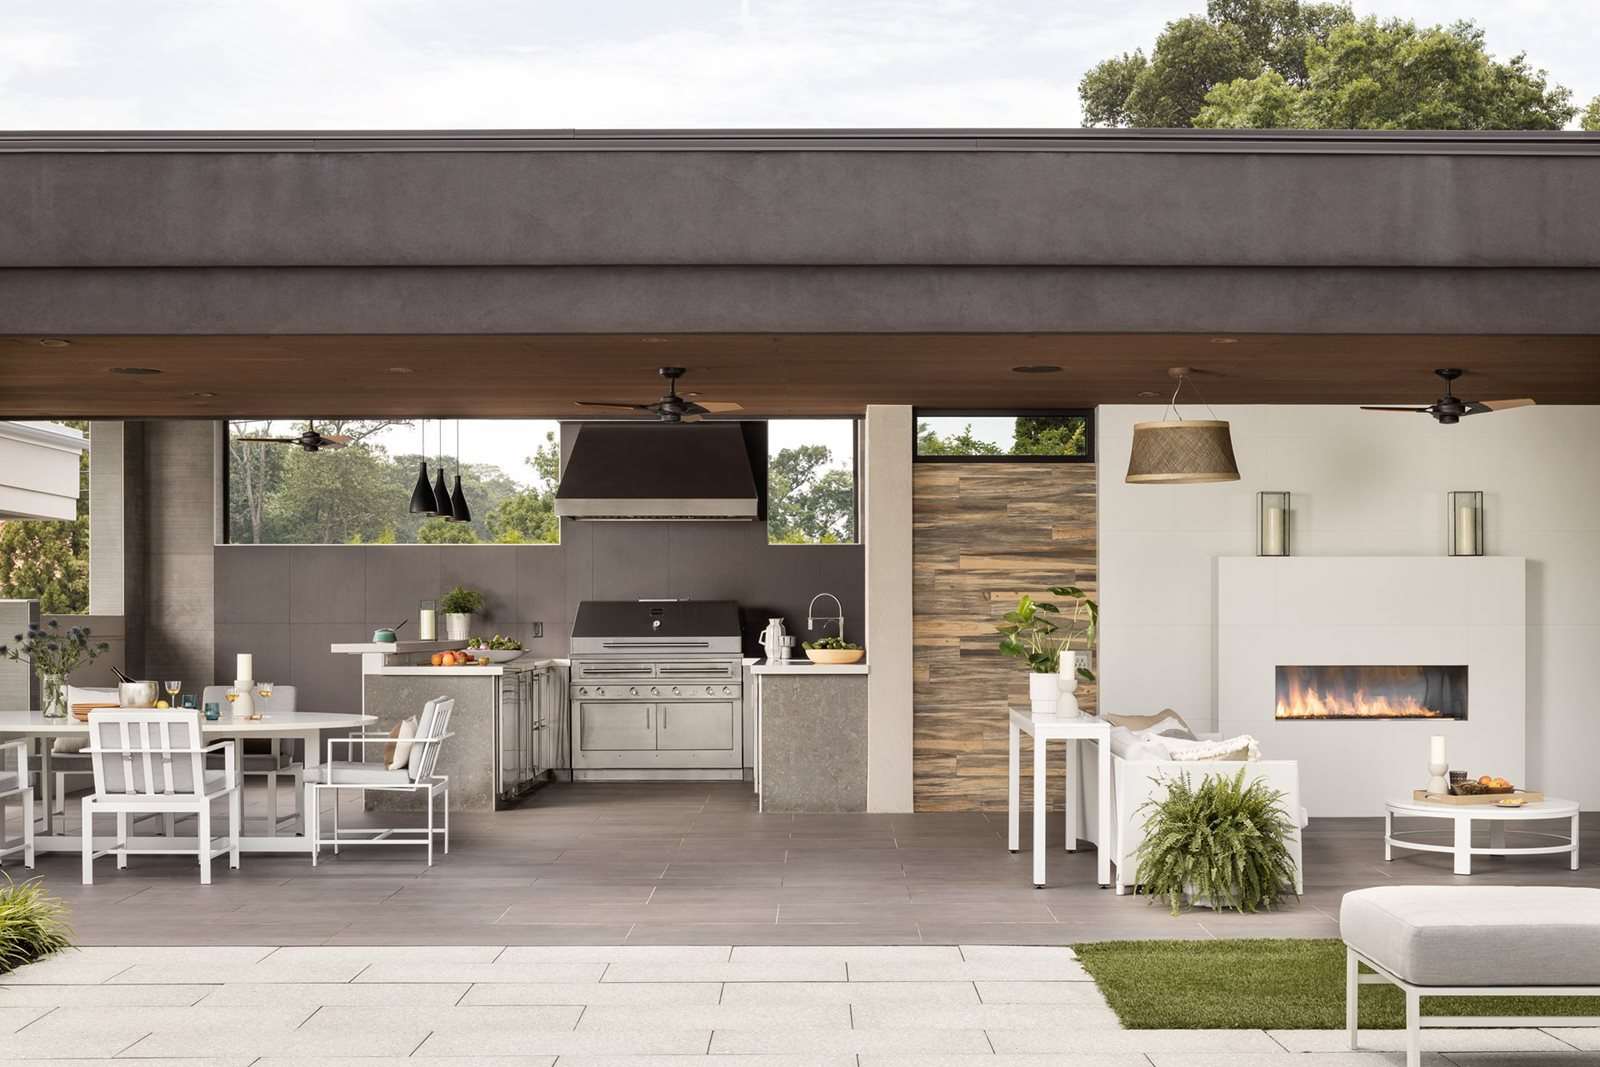 21 Insanely Clever Design Ideas For Your Outdoor Kitchen With